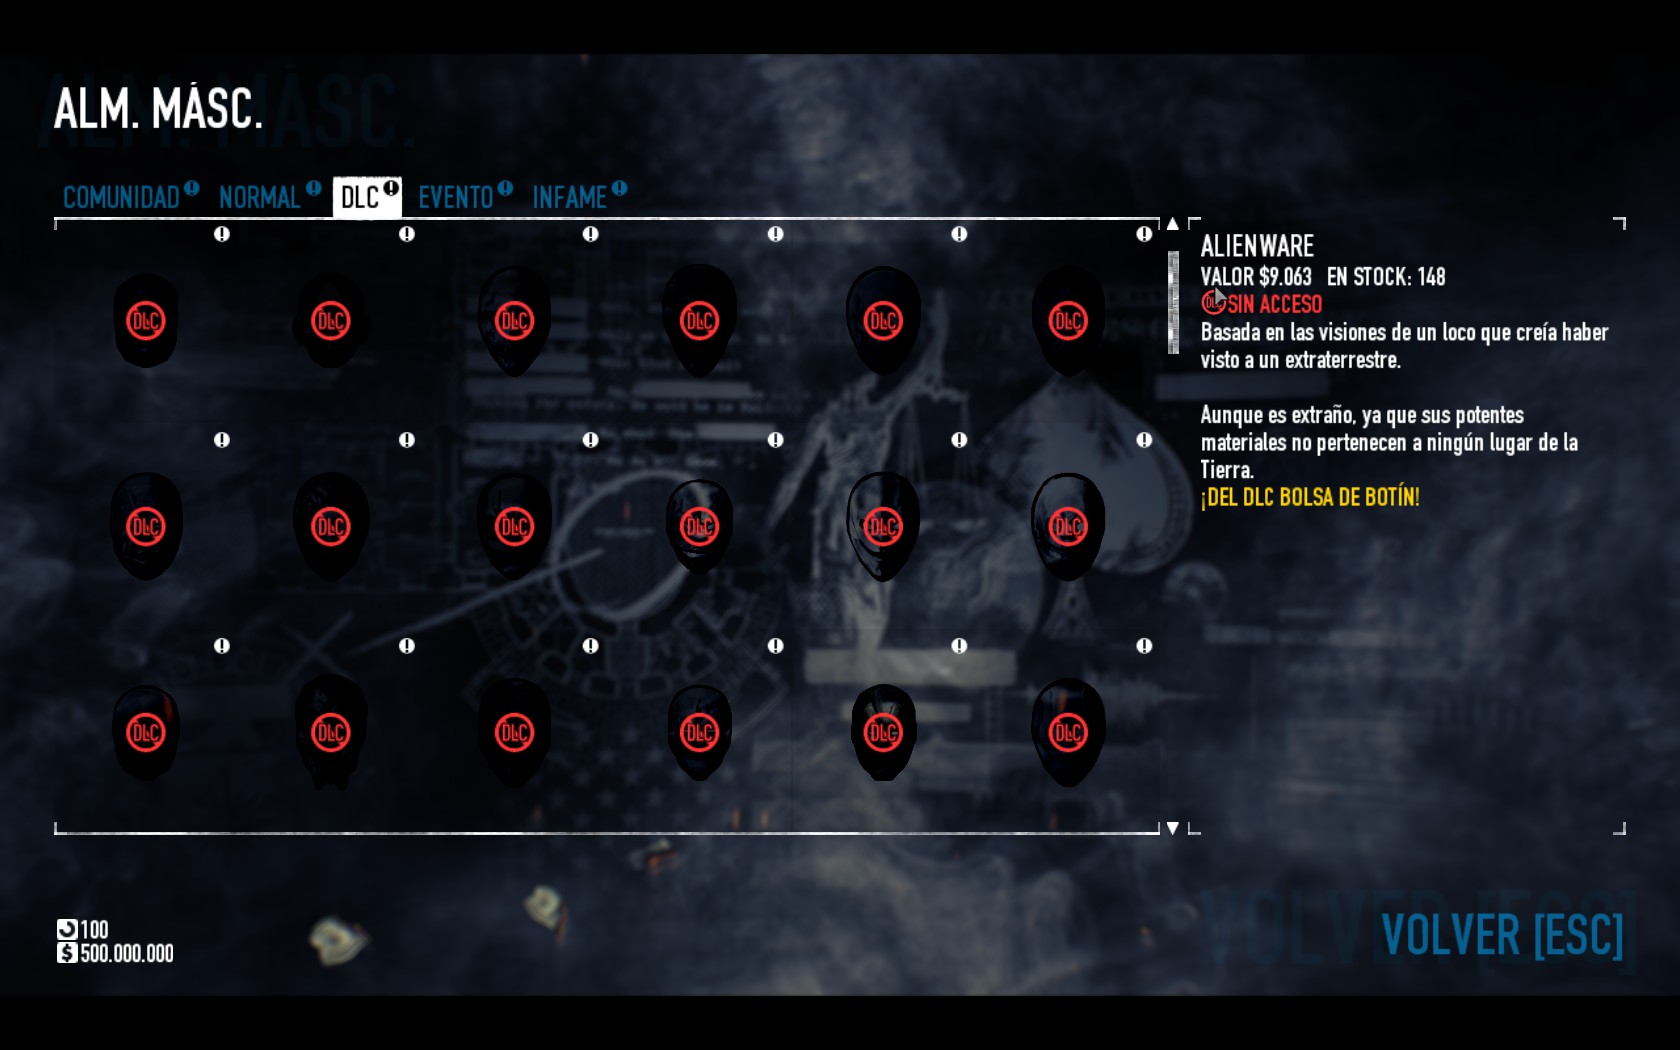 payday 2 cheater tag remover mod